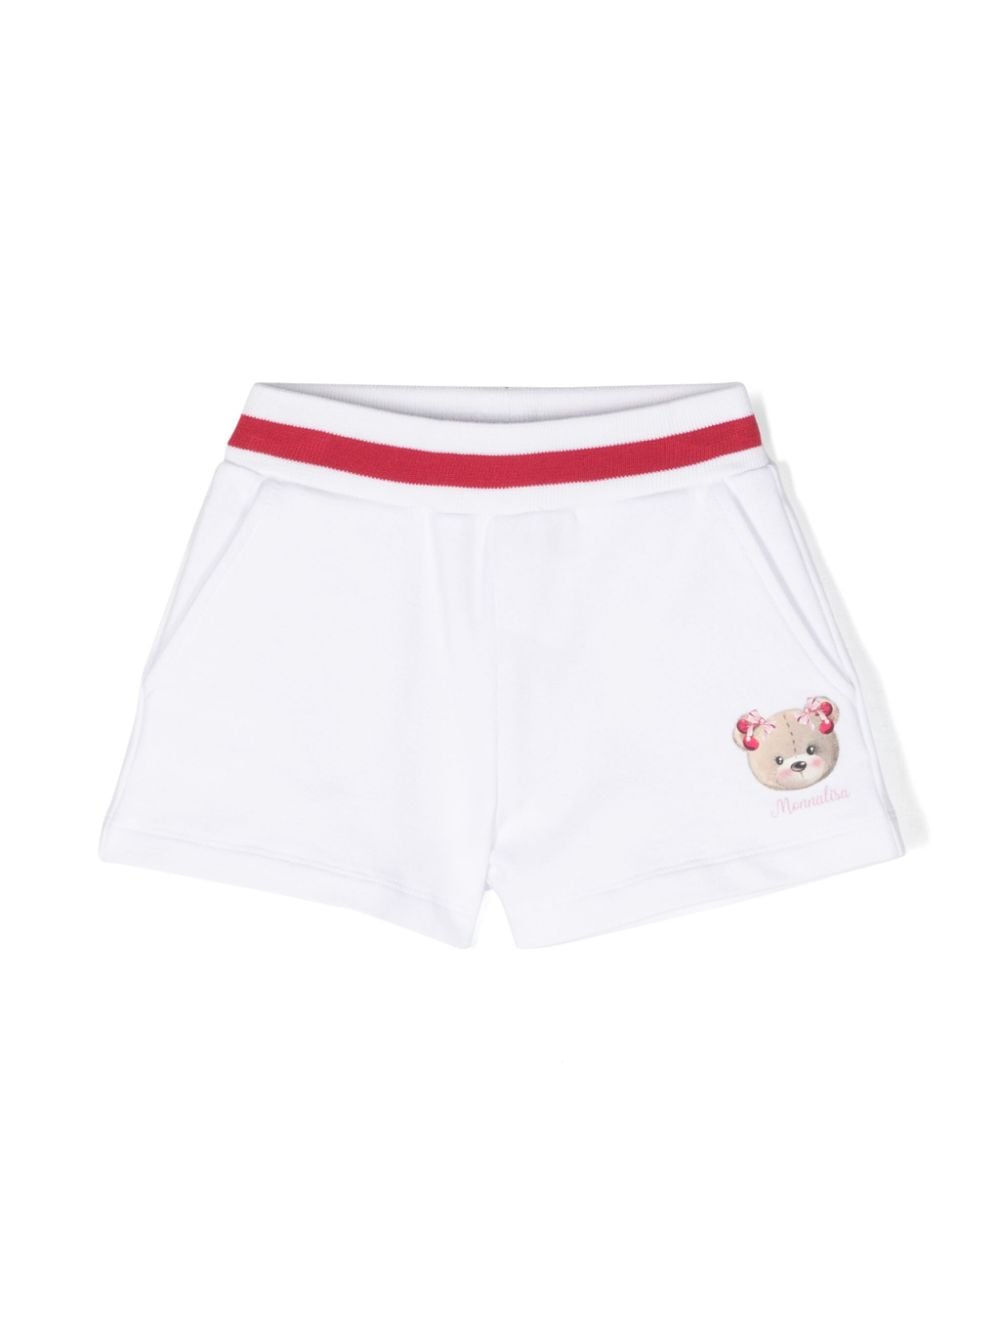 White shorts for baby girls with bear